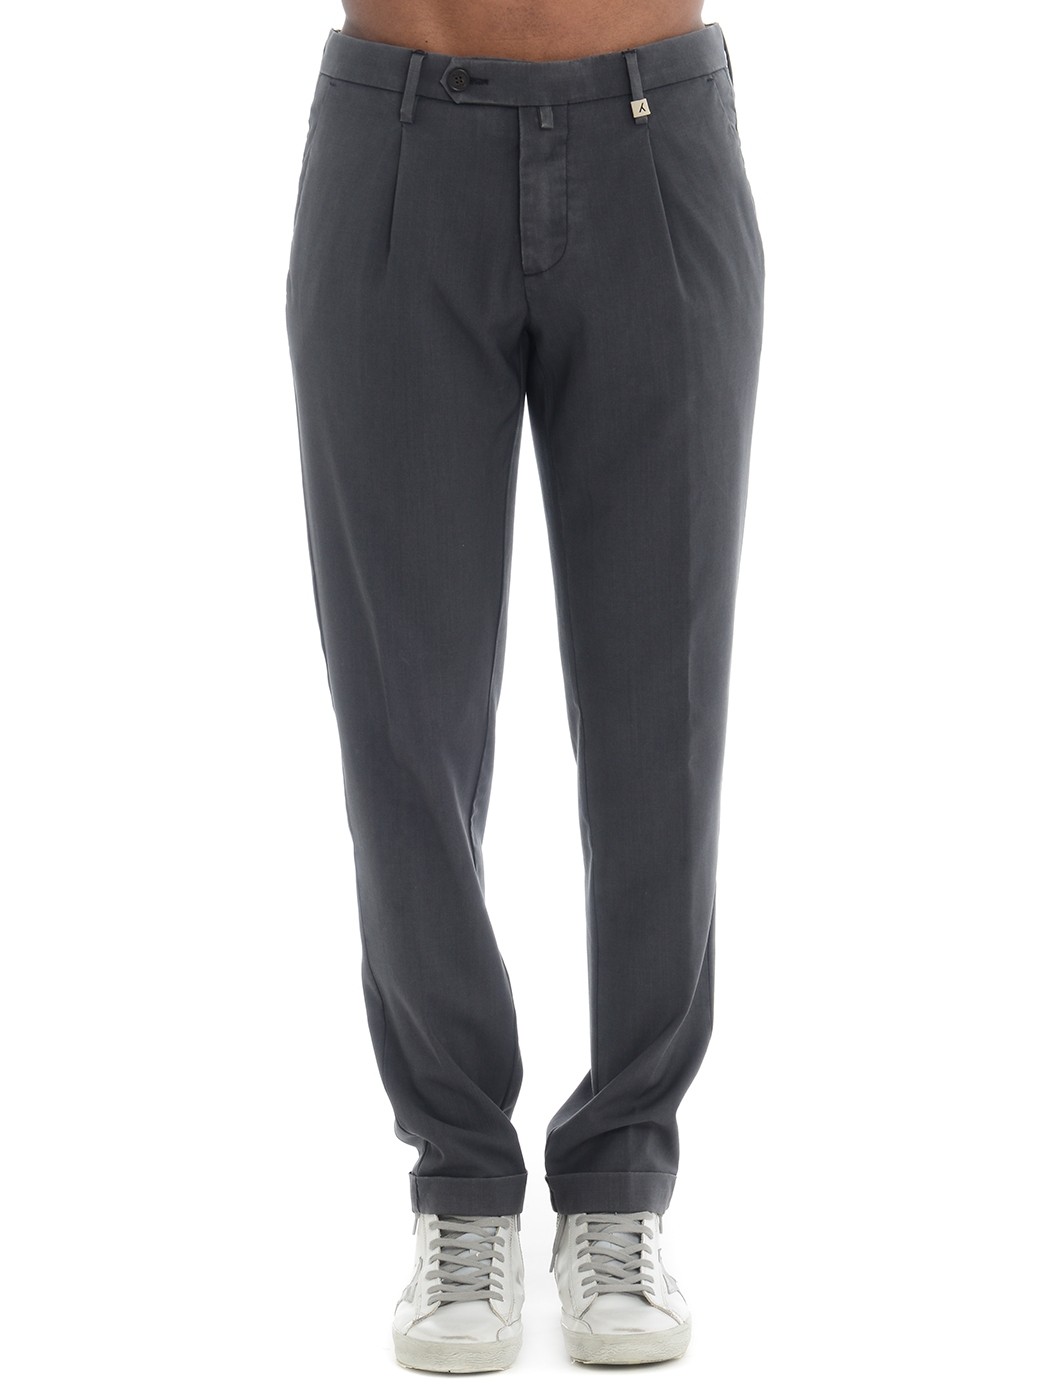  MAN TROUSERS,SPRING SUMMER TROUSERS,COTTON TROUSERS,SKIN FIT TROUSERS,INCOTEX TROUSERS,JACOB COHEN TROUSERS,NEIL BARRETT TROUSERS,MSGM TROUSERS  MYTHS 21M19L 99